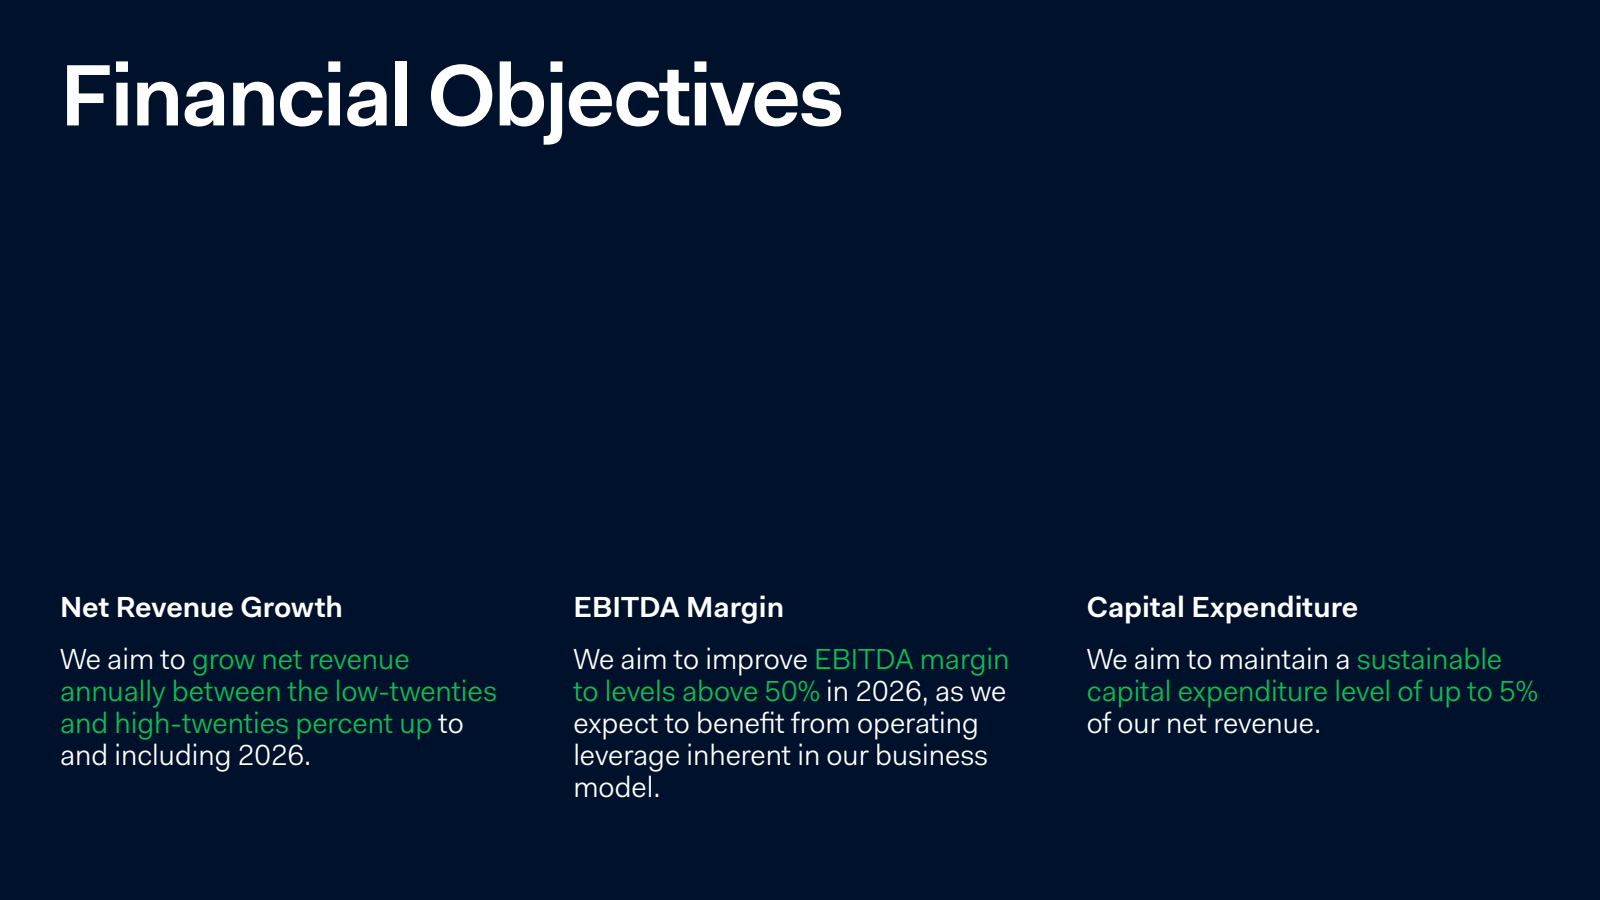 Financial Objectives